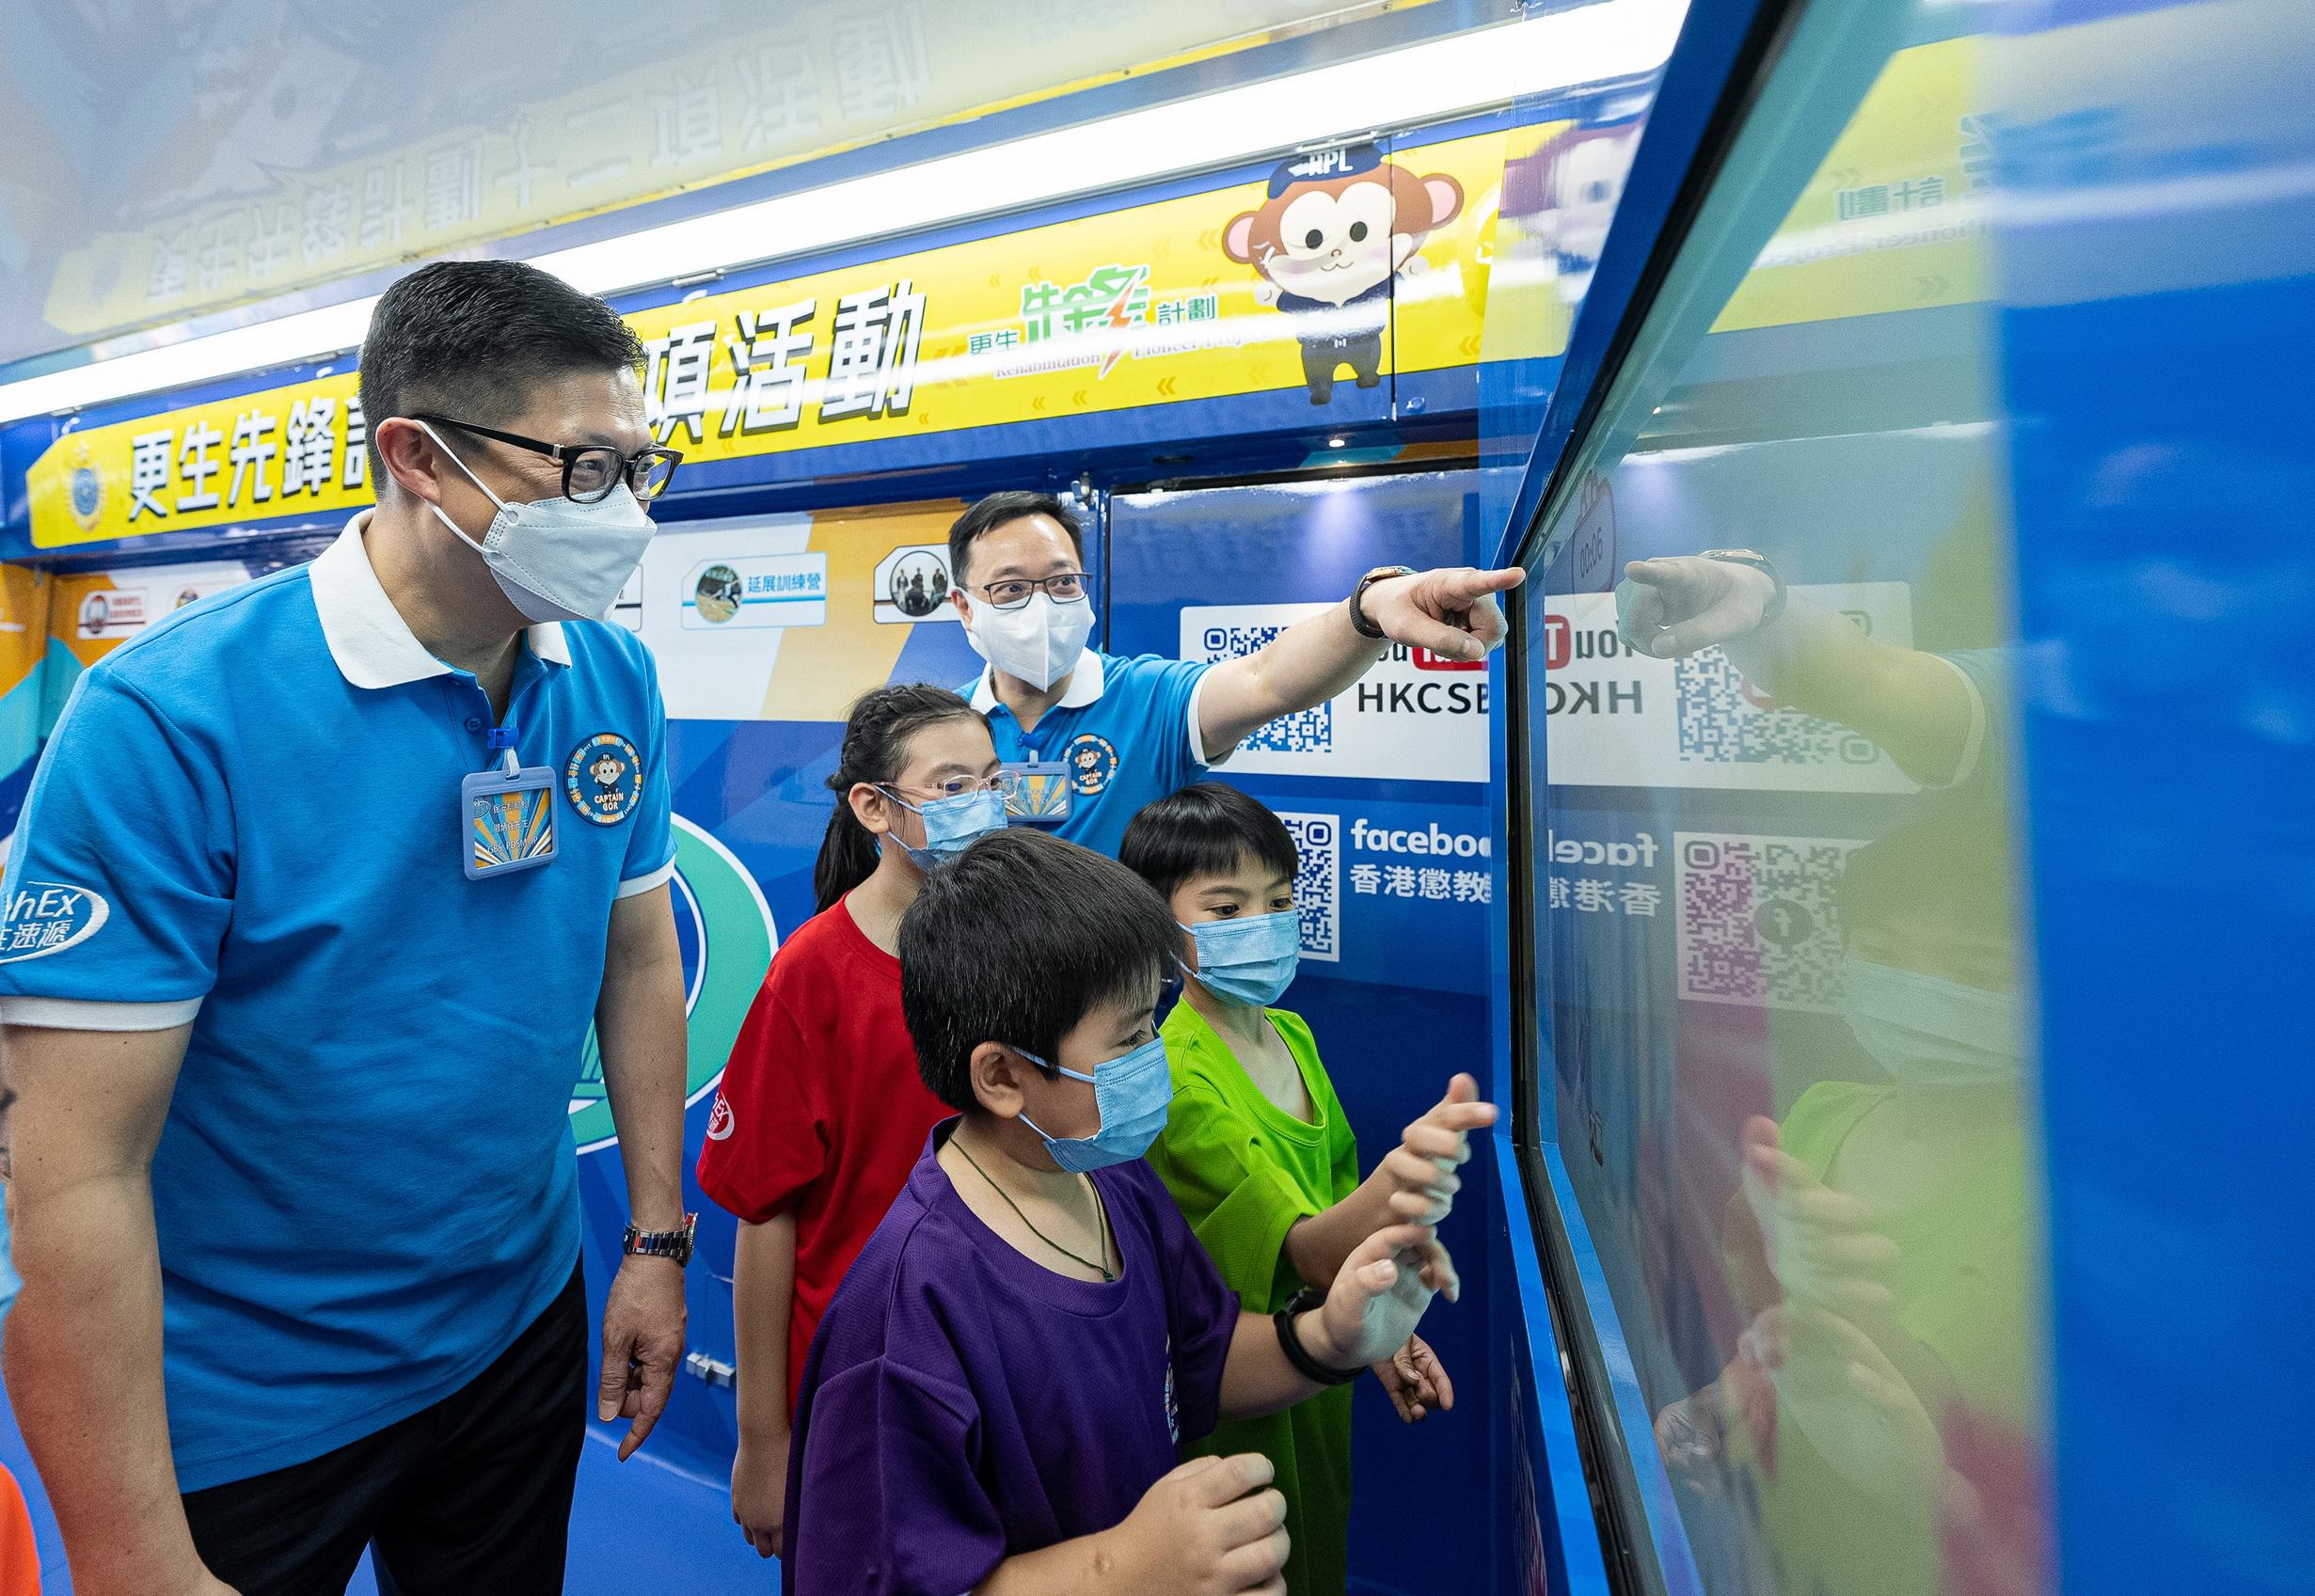 The Correctional Services Department held the kick-off ceremony of its brand-new community education activity "Rehabilitation Express" today (November 11). Photo shows the Secretary for Security, Mr Tang Ping-keung (first left), and the Commissioner of Correctional Services, Mr Wong Kwok-hing (back row, first right), playing an electronic game with students on board the promotion vehicle.

